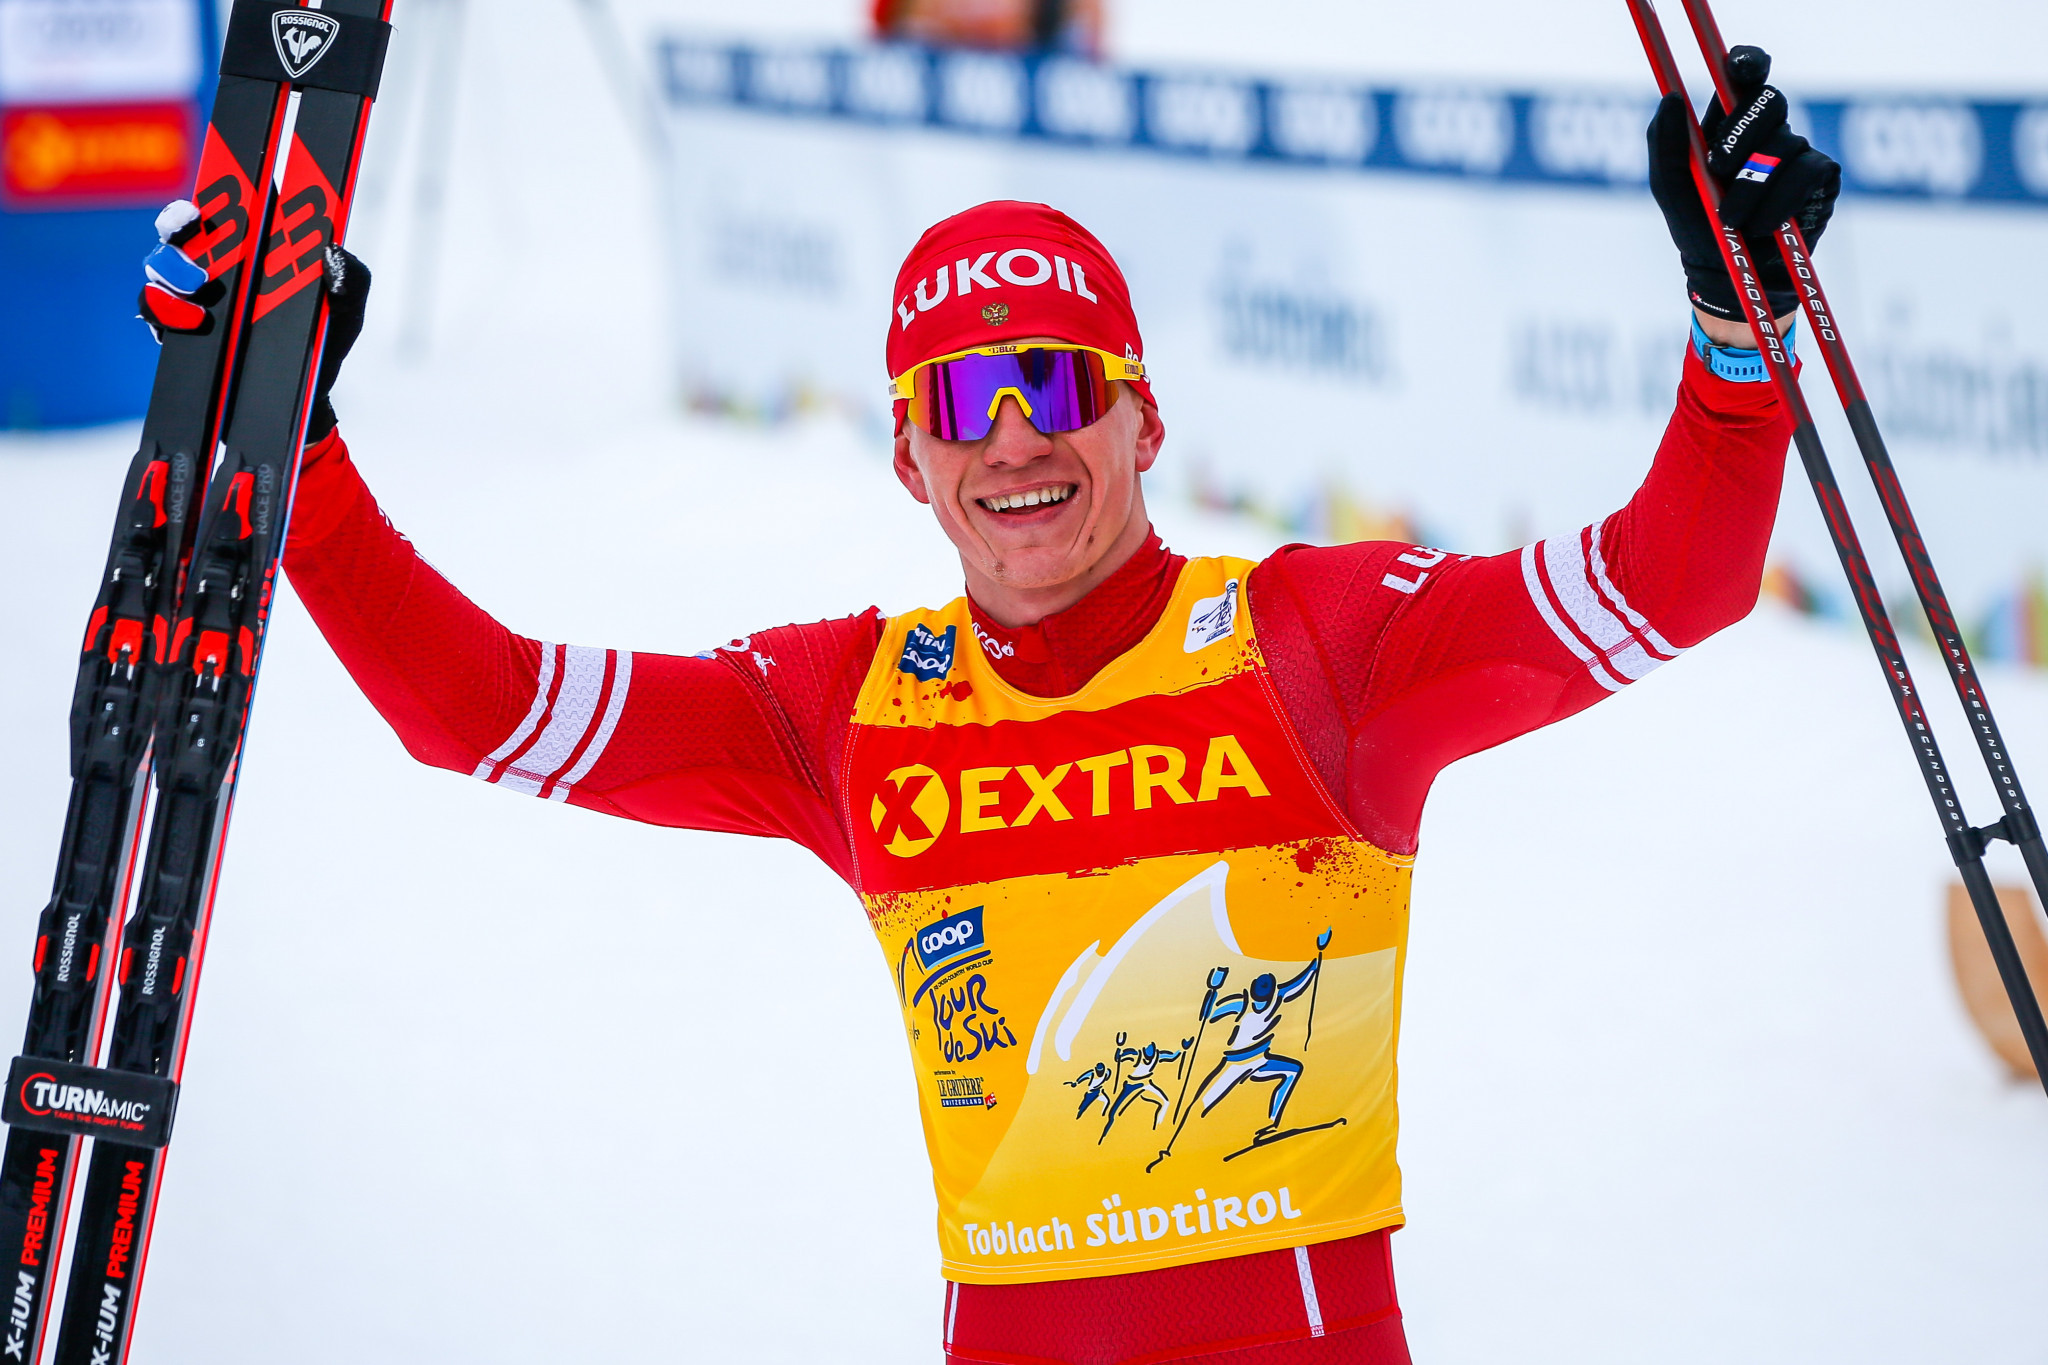 Alexander Bolshunov leads a strong Russian Olympic Committee cross-country team for Beijing 2022 ©Getty Images